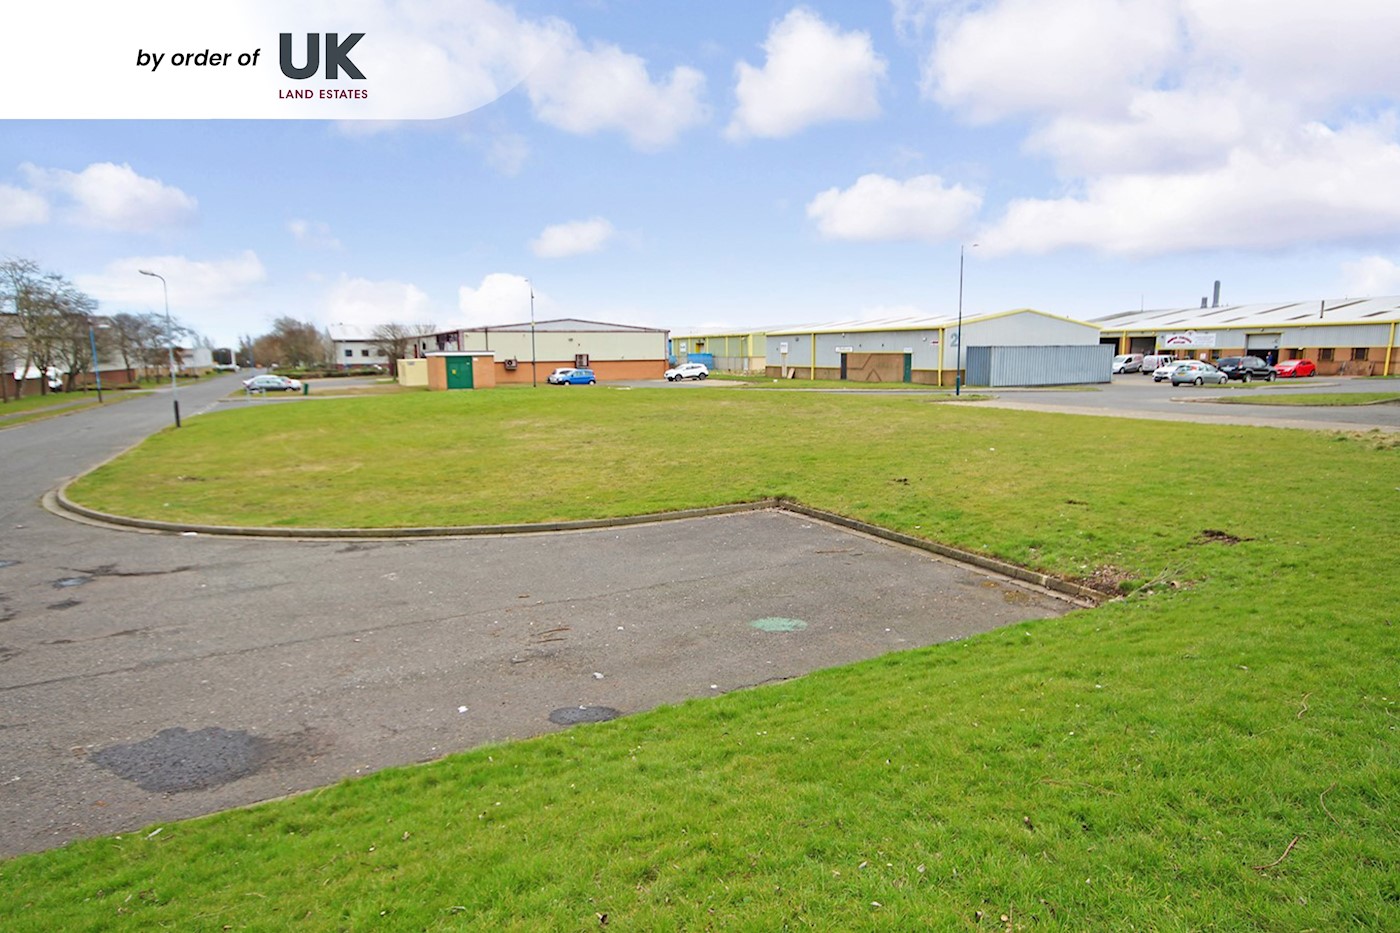 Plot 5 Park View Industrial Estate, Prospect Way, Hartlepool, TS25 1UD 1/4